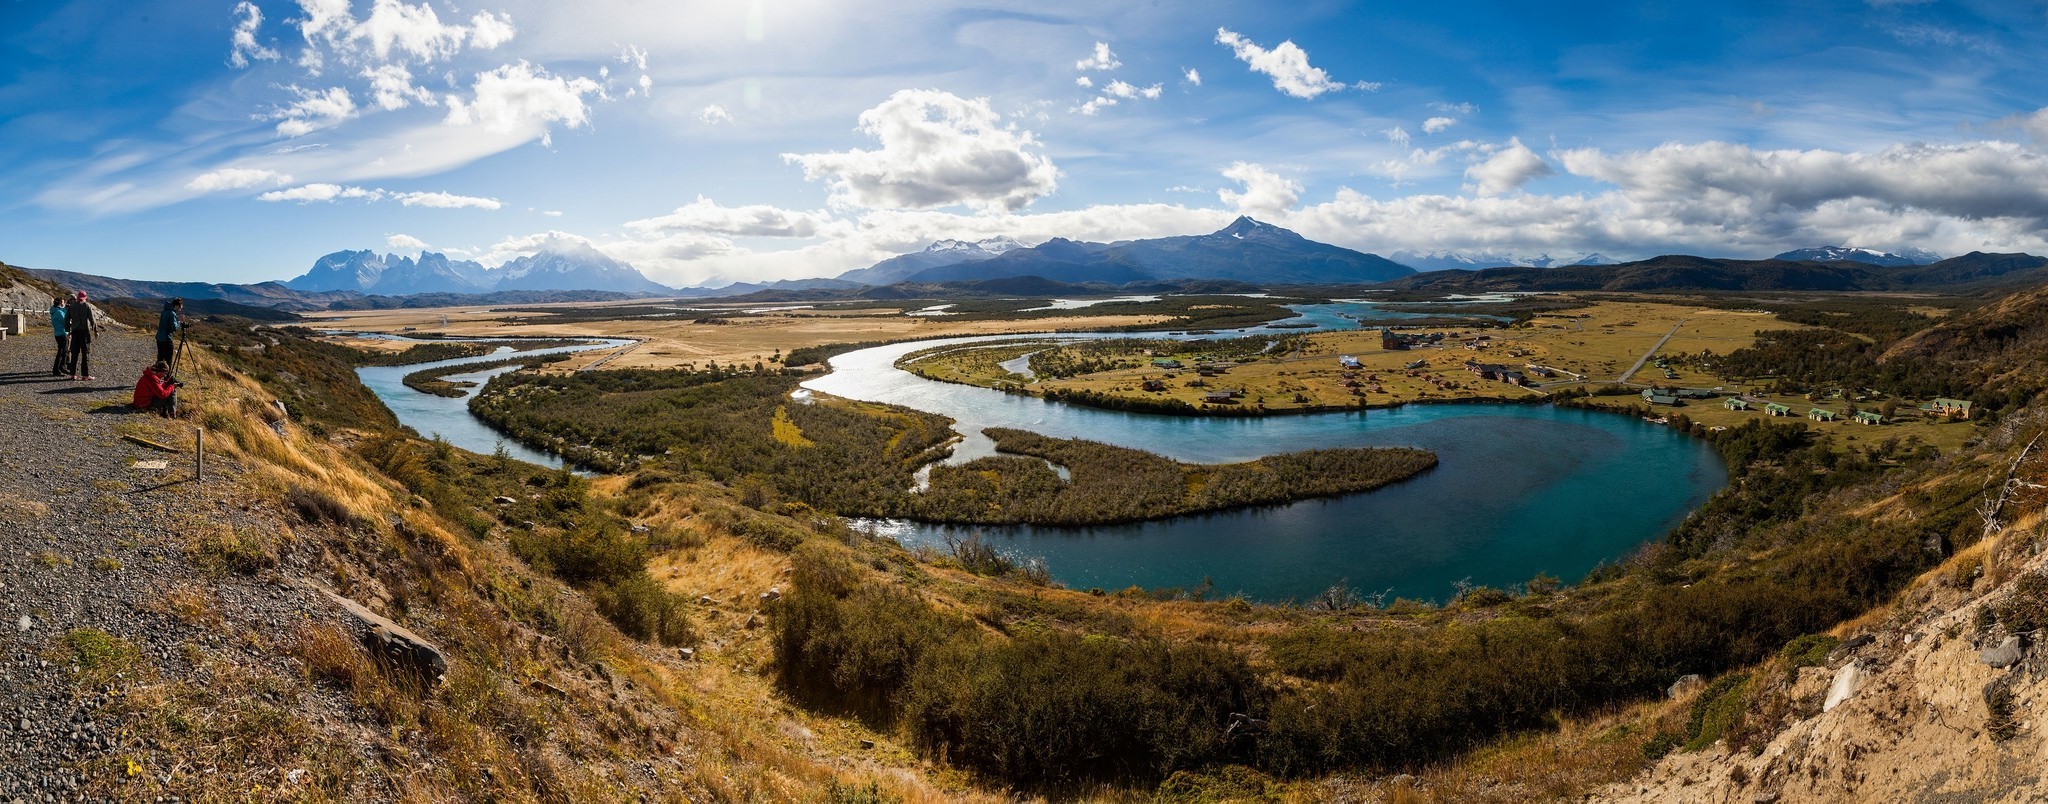 people, Photographer, Nature, Landscape, Photography, Panoramas, River, Mountains, Clouds, Village, Shrubs, Patagonia, Chile Wallpaper